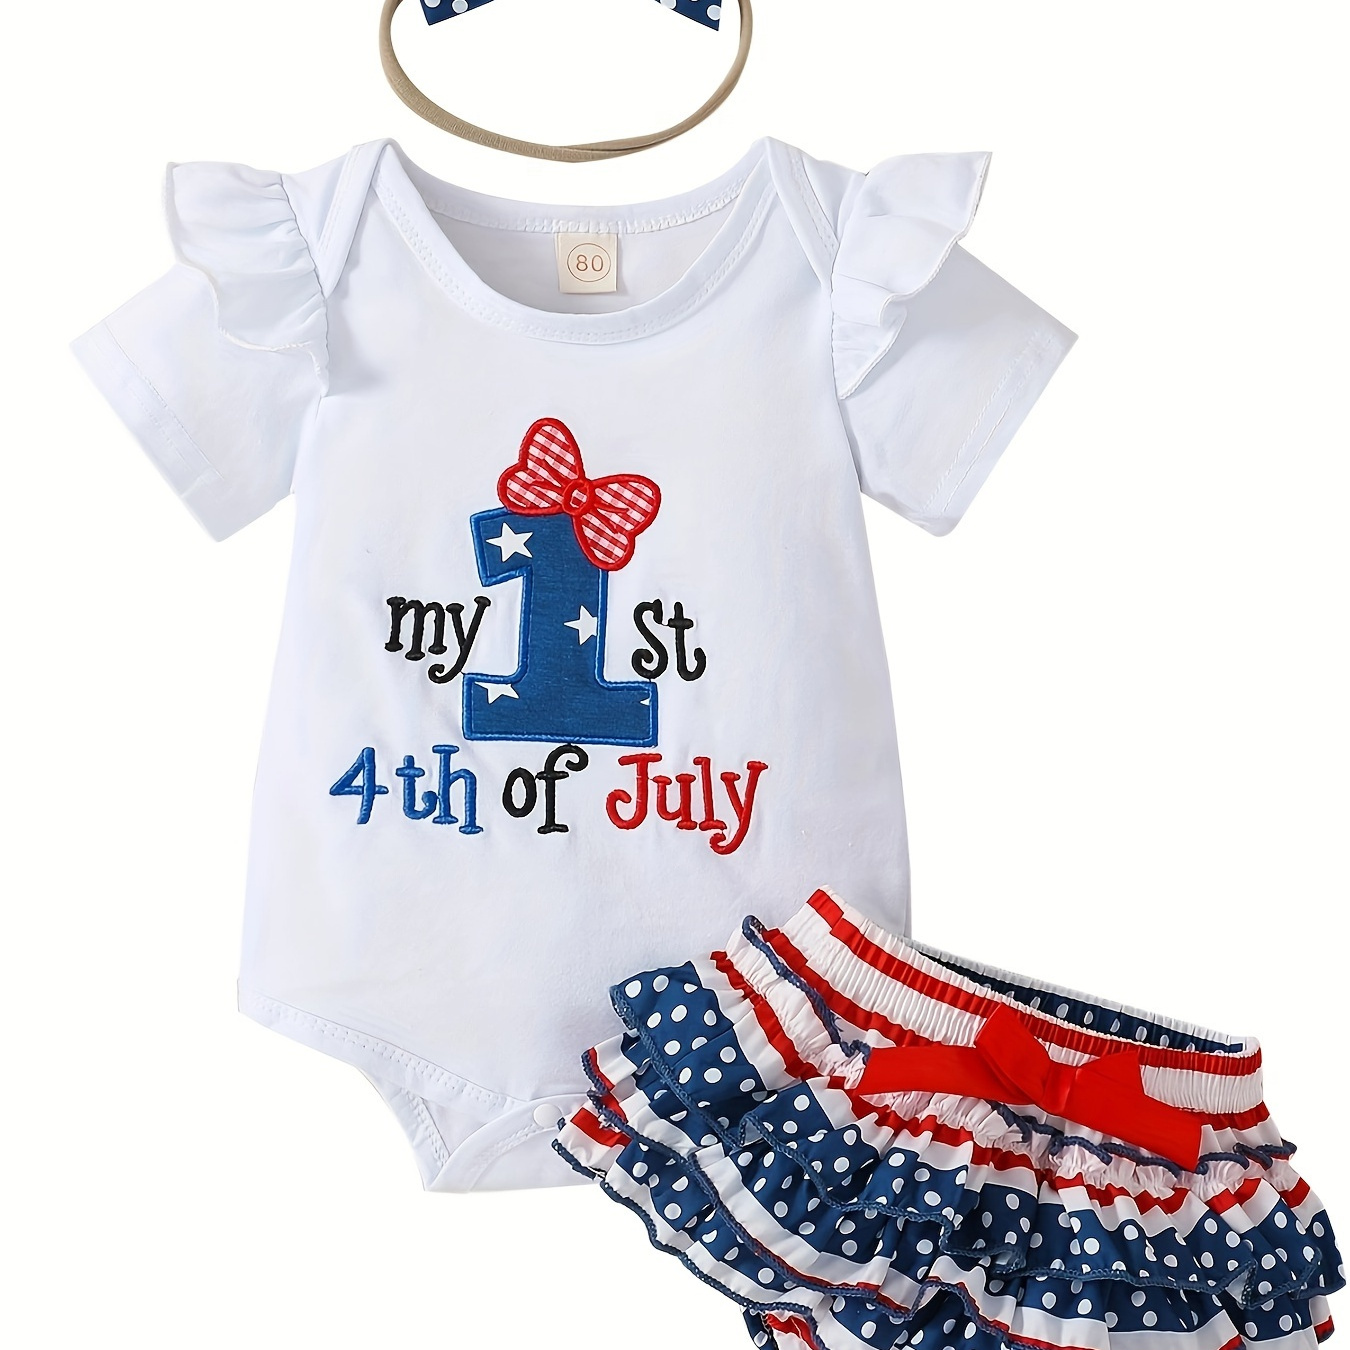 

Baby's "my 1st 4th Of July" Embroidered 2pcs Independence Day Outfit, Short Sleeve Triangle Onesie & Layered Shorts Set, Toddler & Infant Girl's Clothes